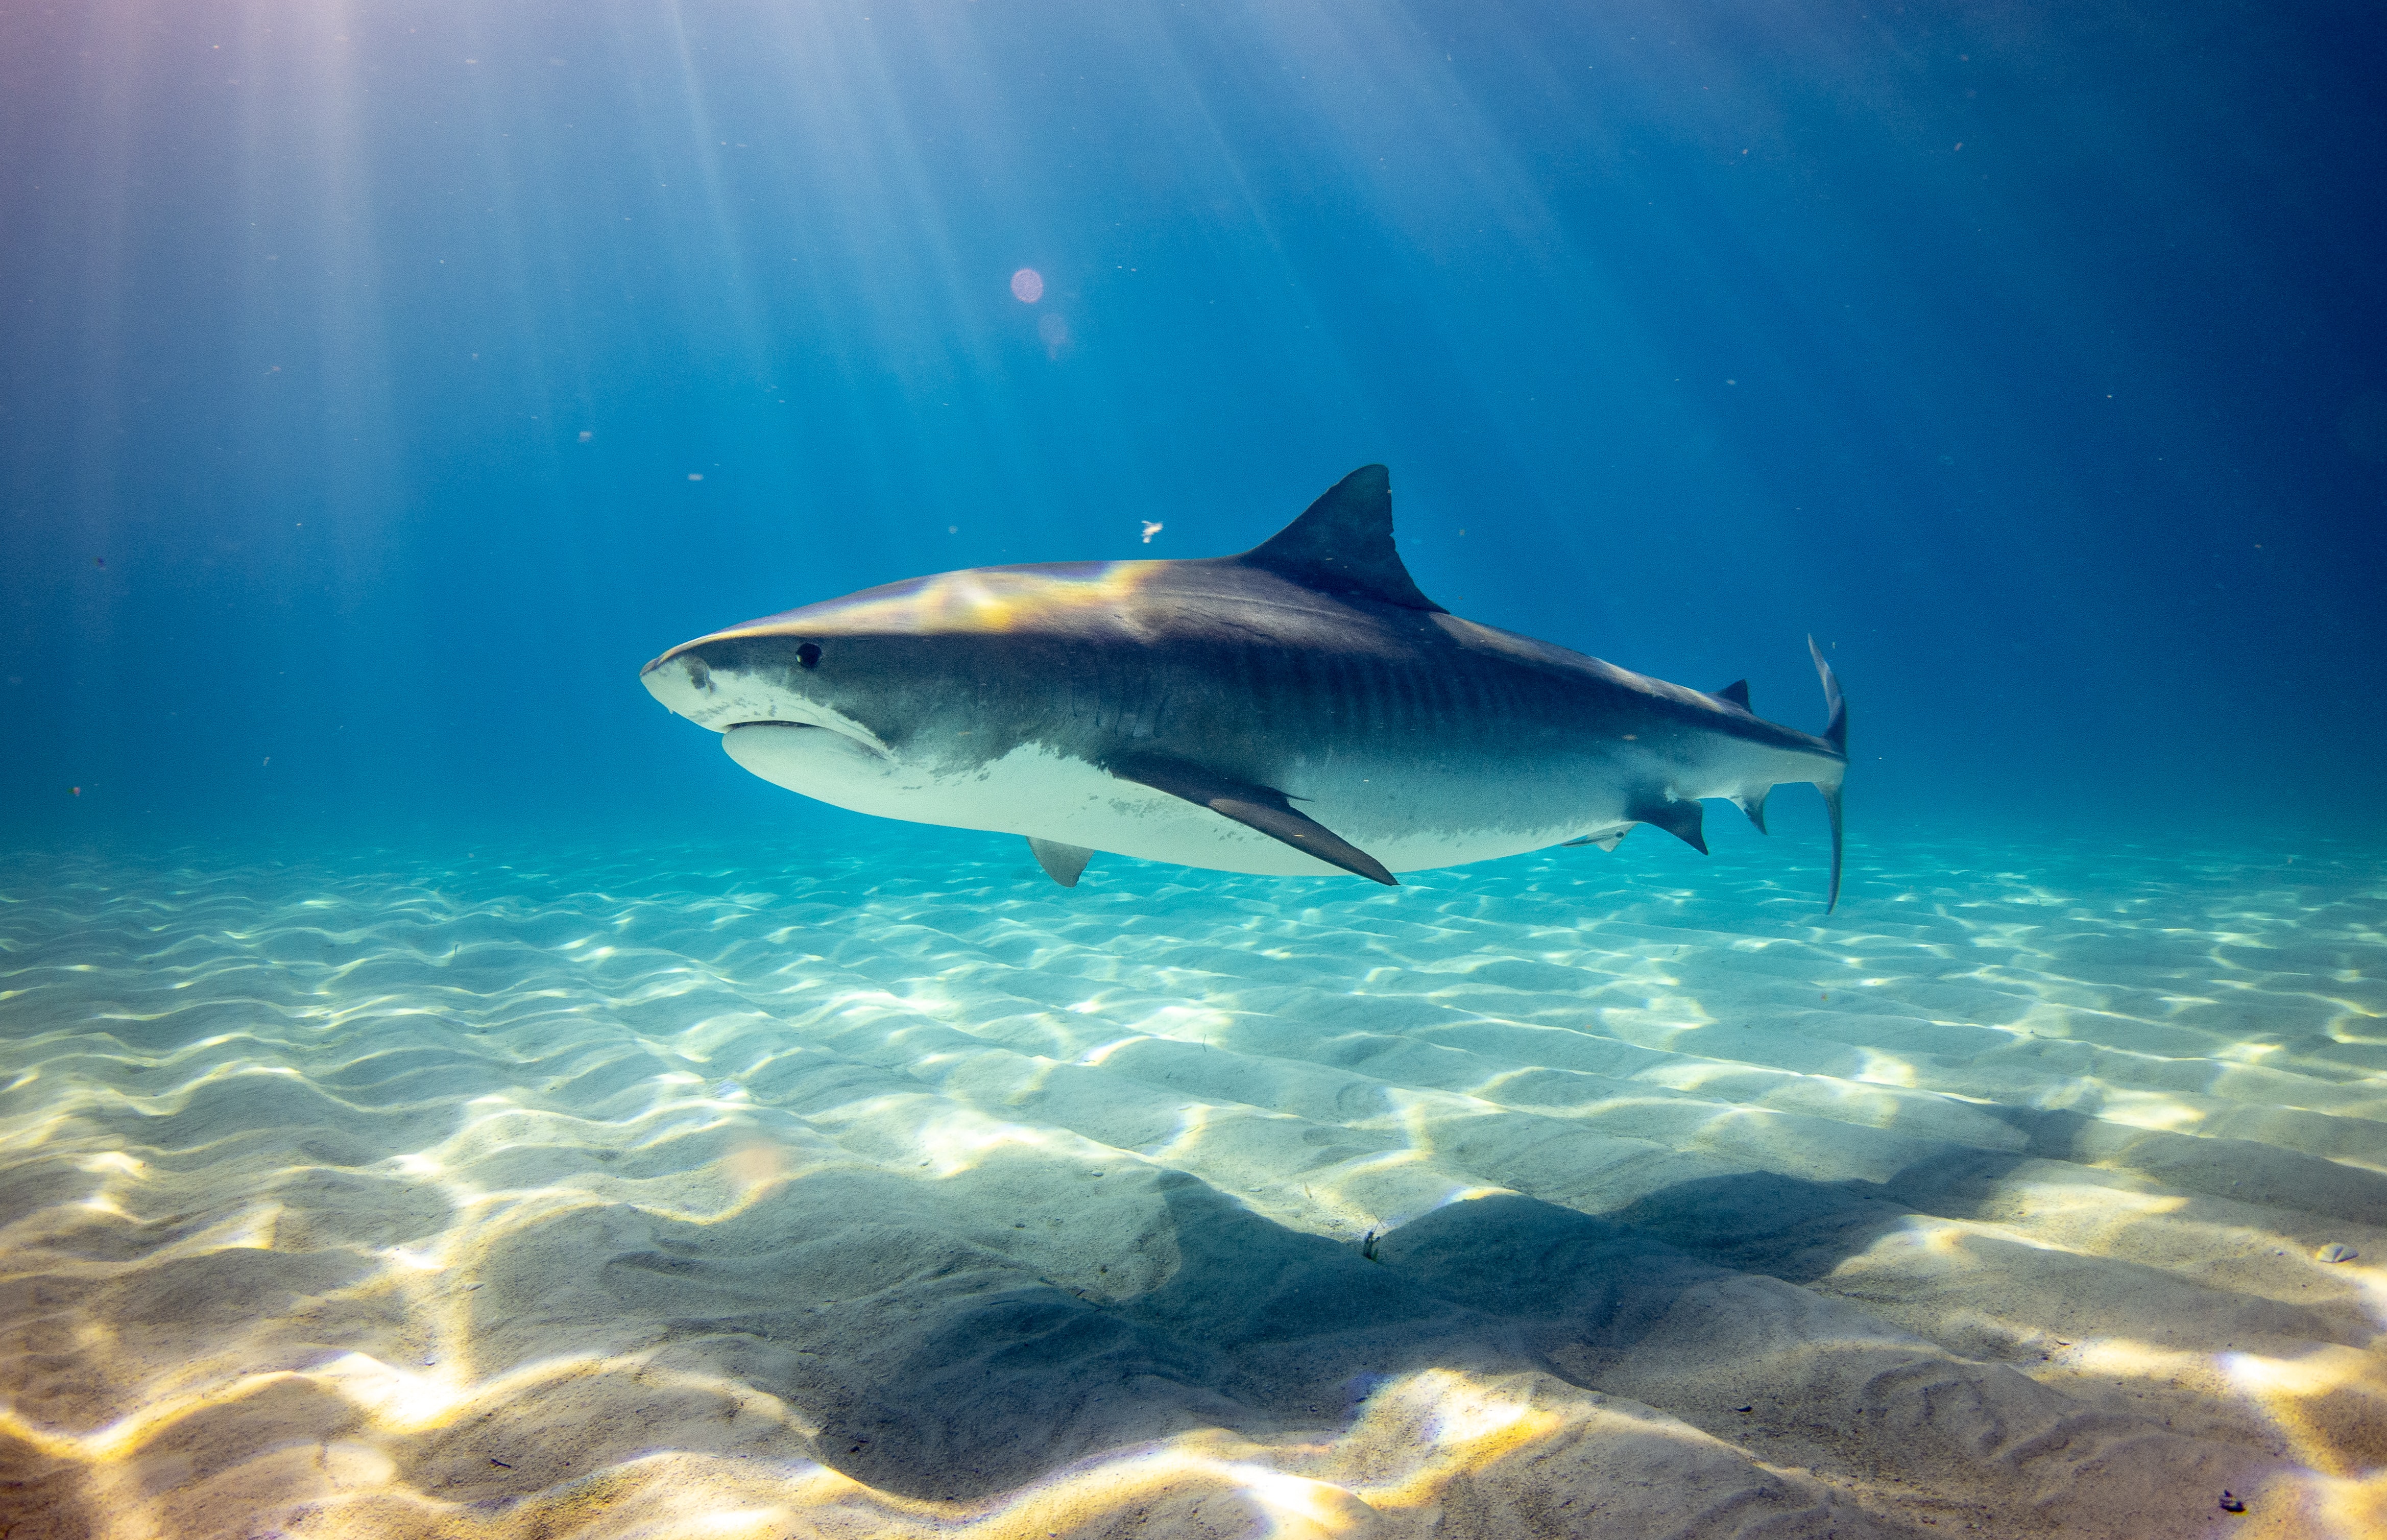 🦈 Hawaii is the first US state to enact ban on shark fishing